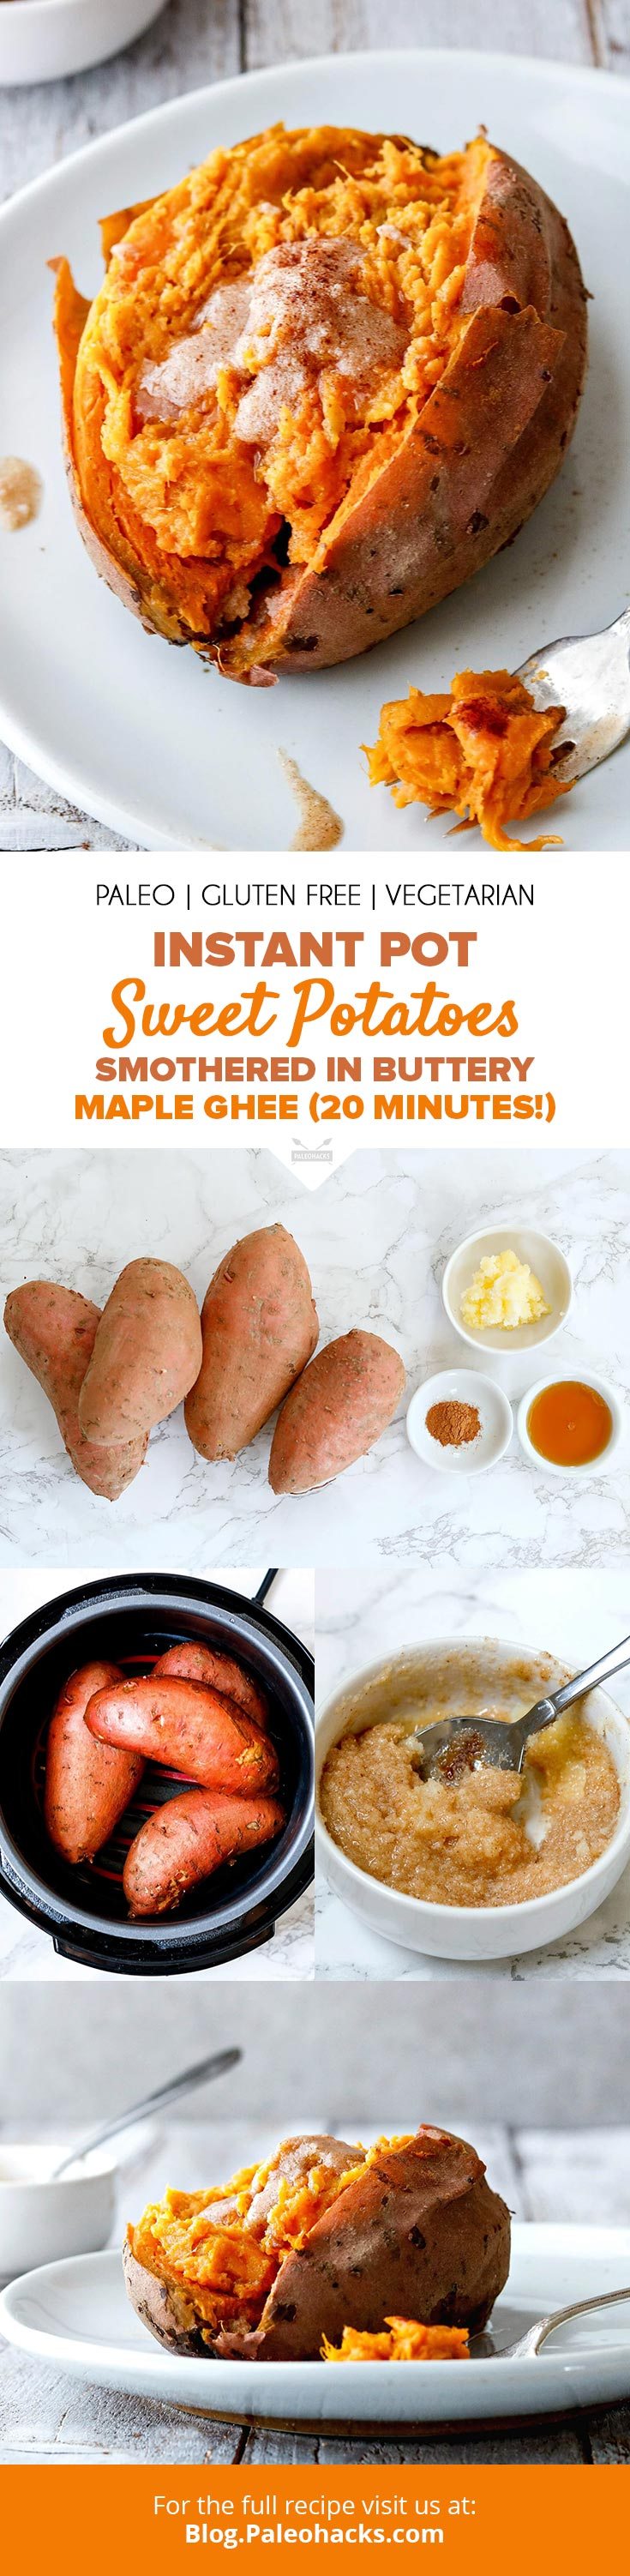 Instant Pot Sweet Potatoes Smothered In Buttery Maple Ghee 20 Min,Fried Potatoes